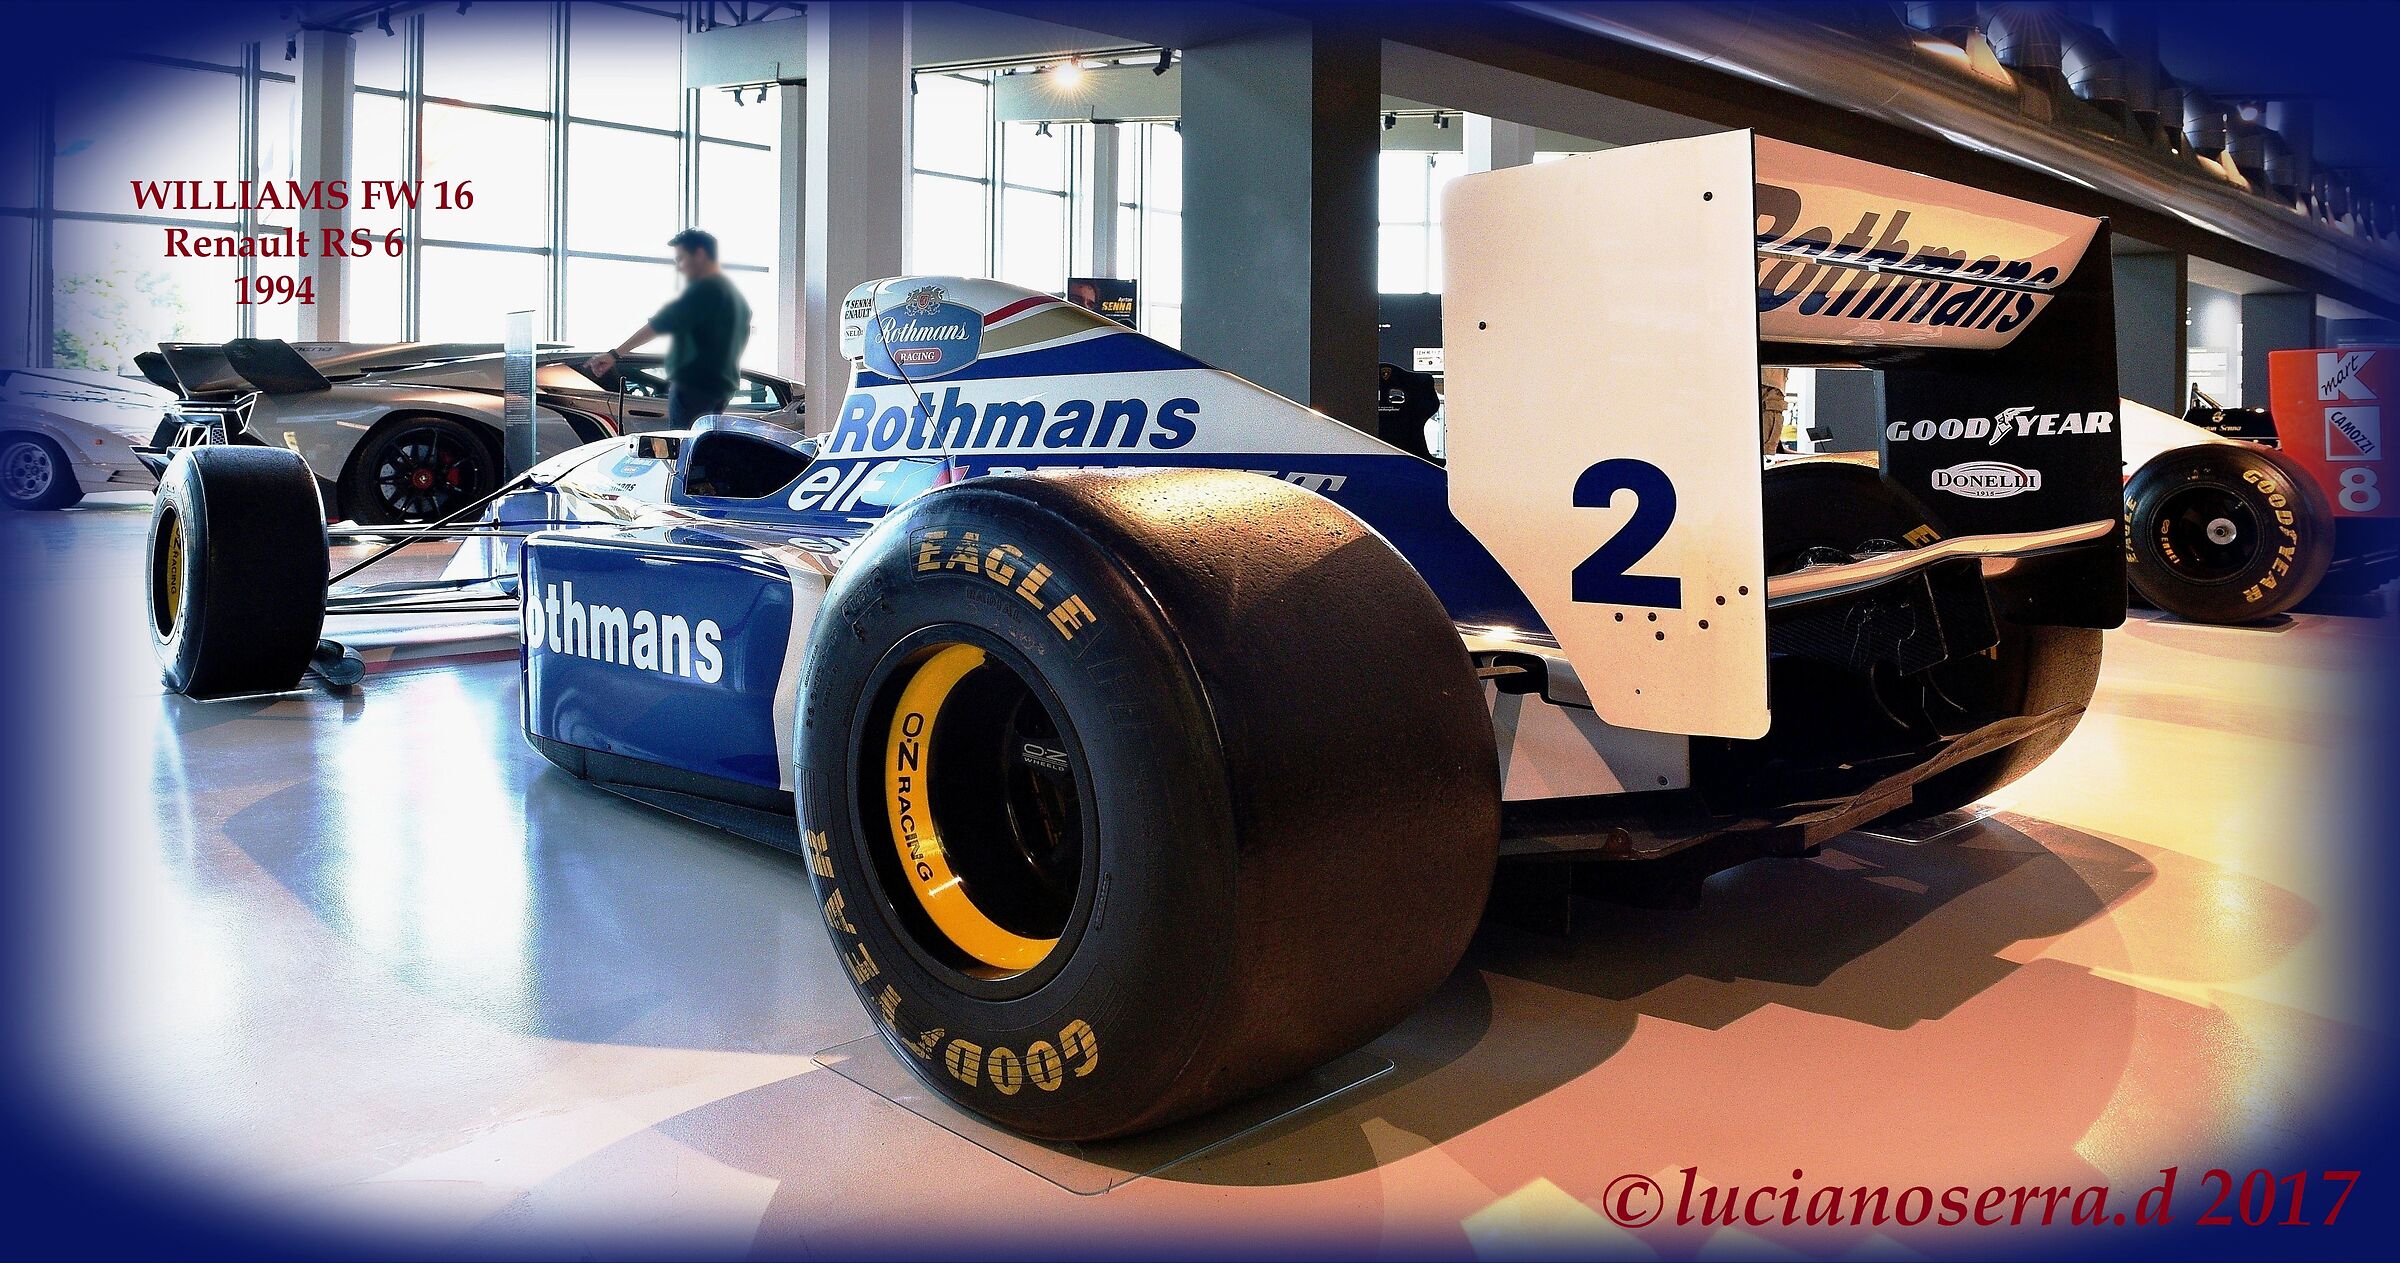 Williams FW 16 Renault RS 6 - 1994...